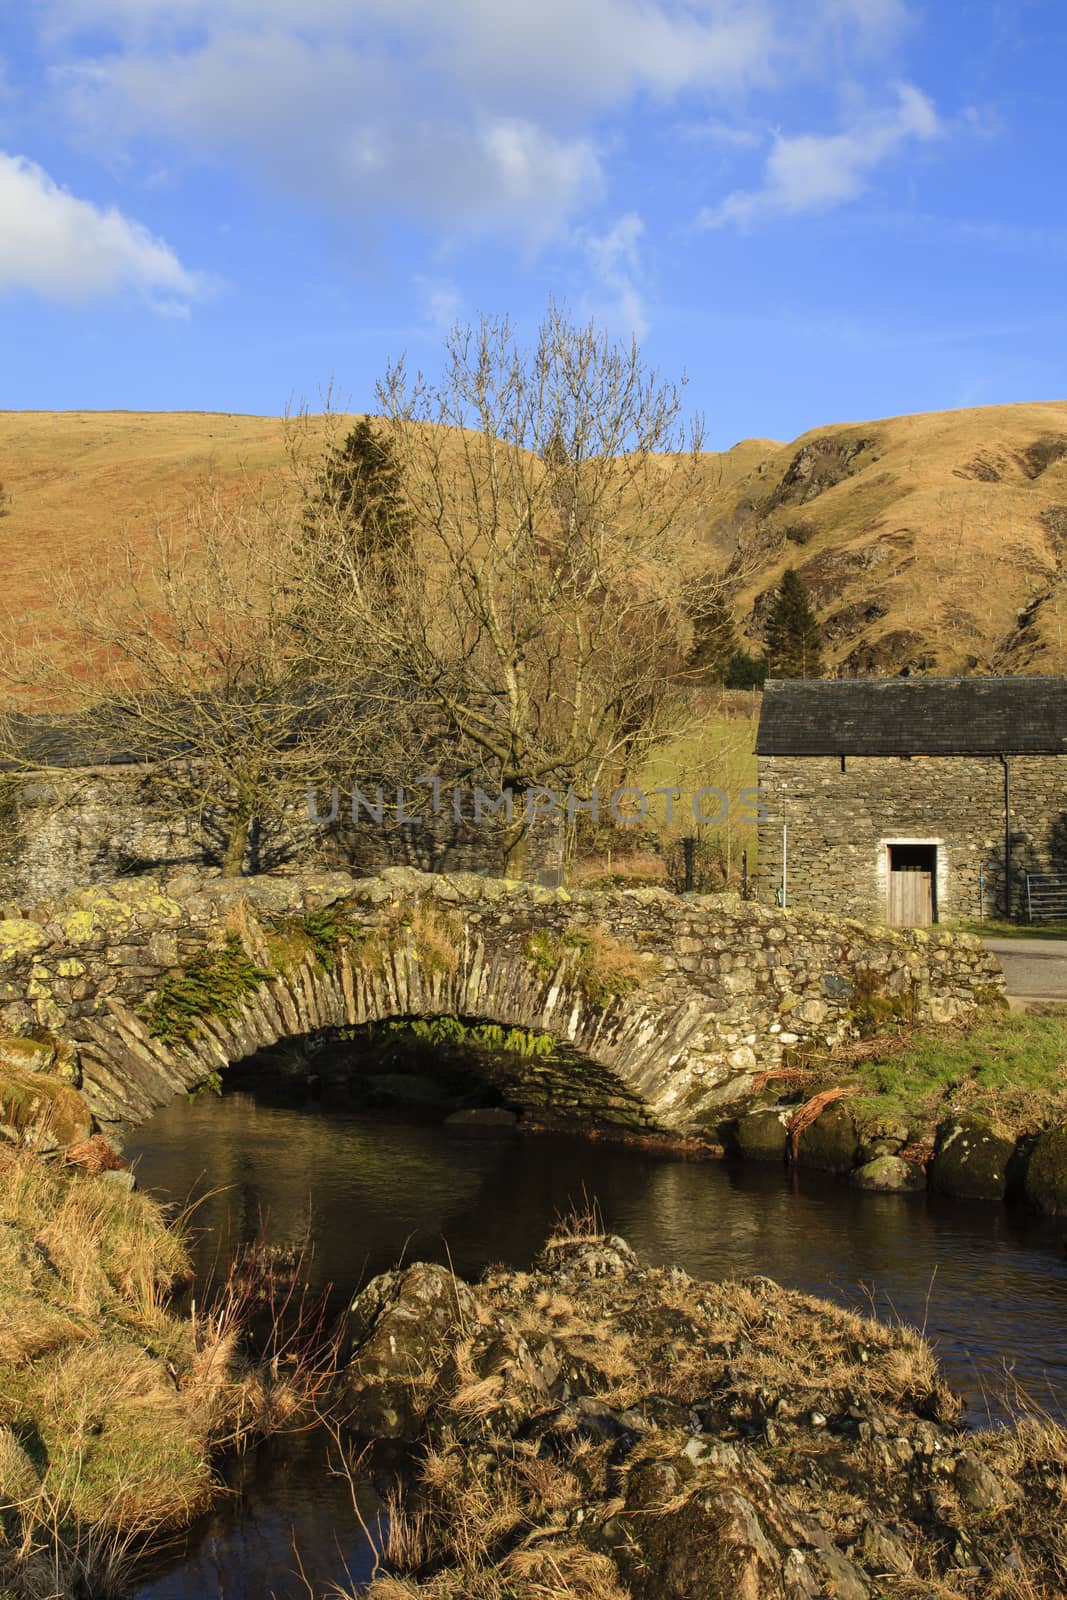 The stone packhorse bridge crossing Watendlath Beck is situated in Watendlath, Cumbria above Derwentwater in the English Lake District National Park.